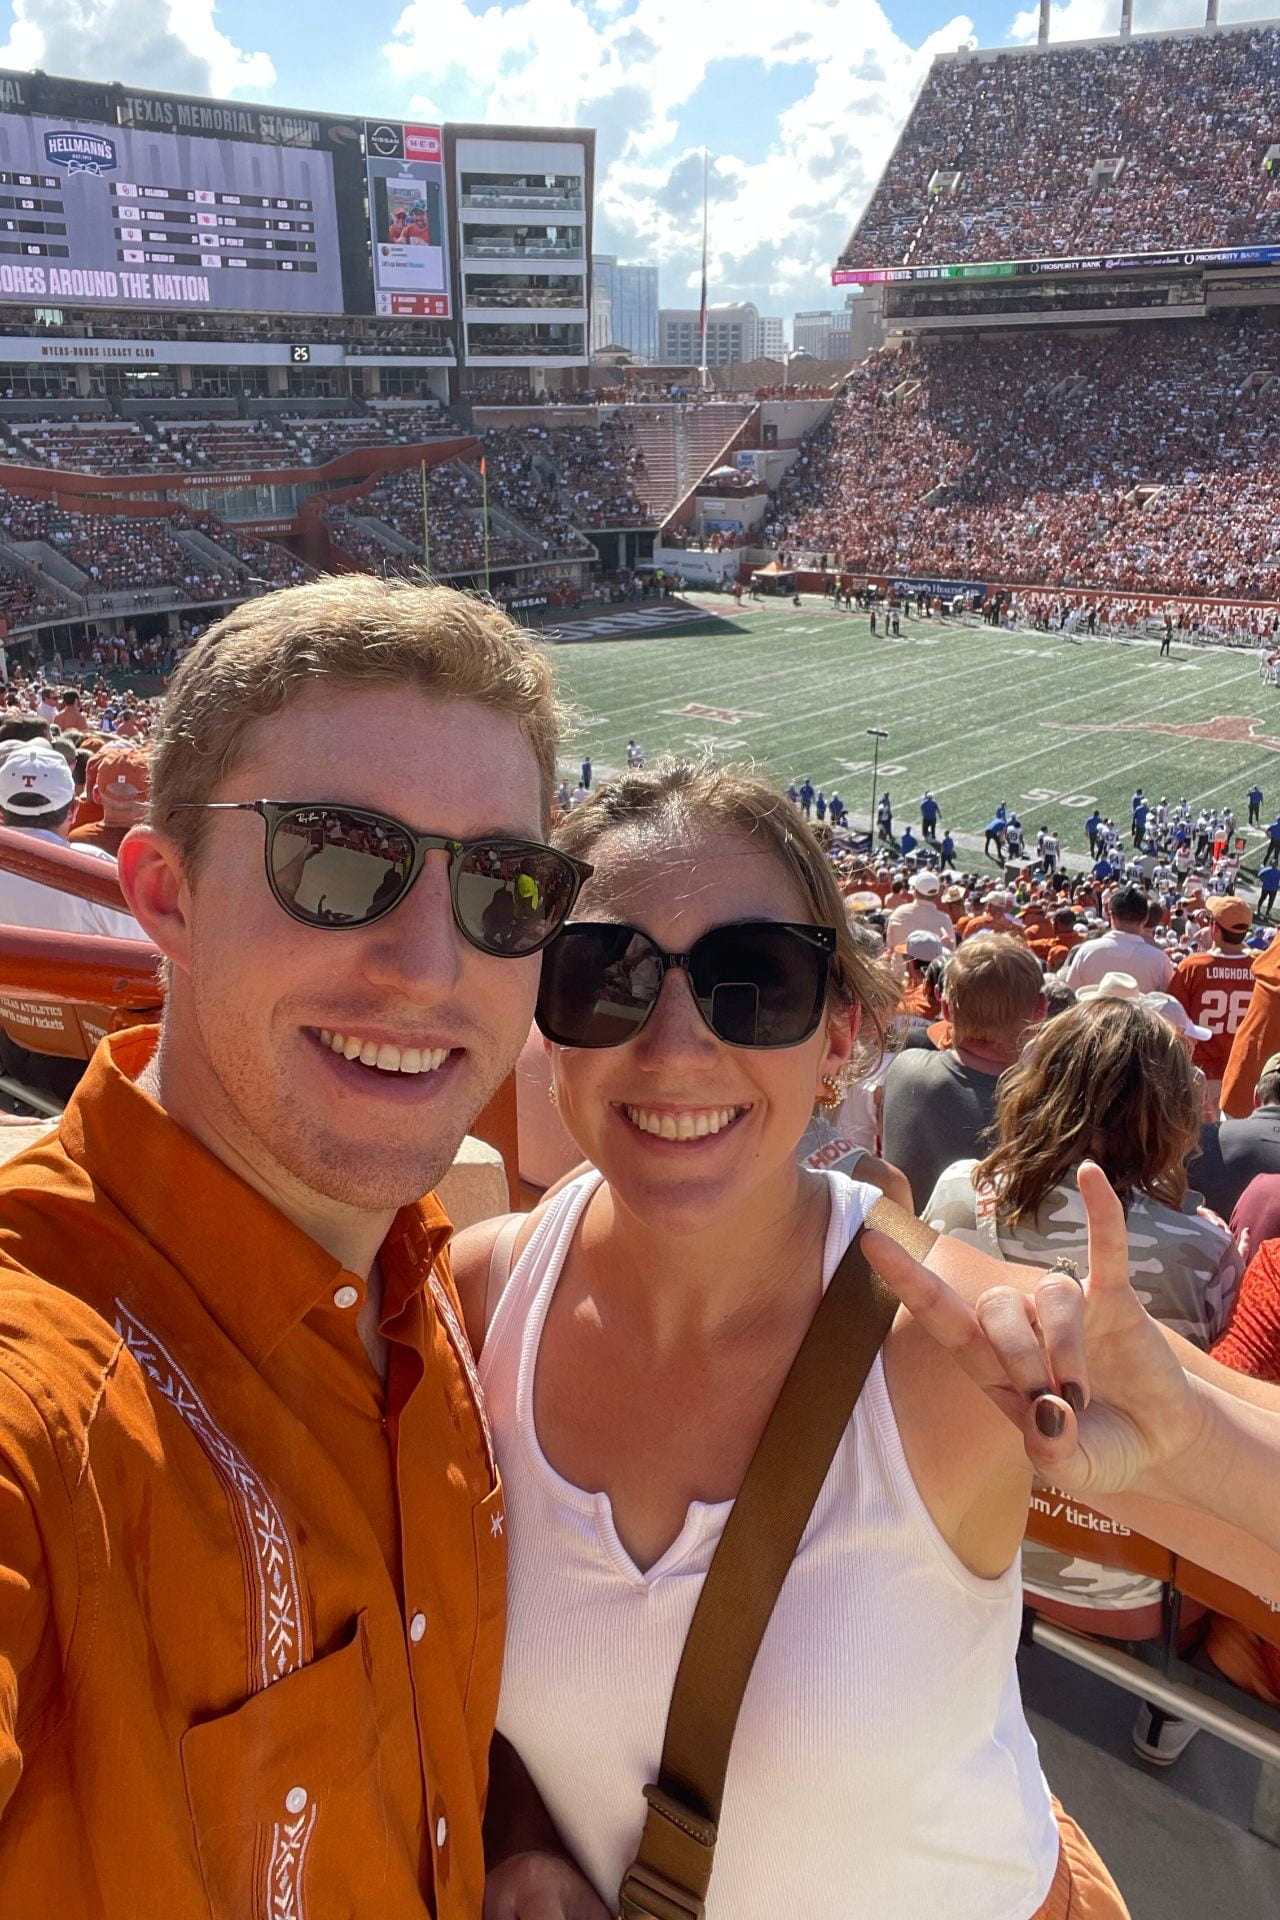 Marion and her husband at a UT football game.